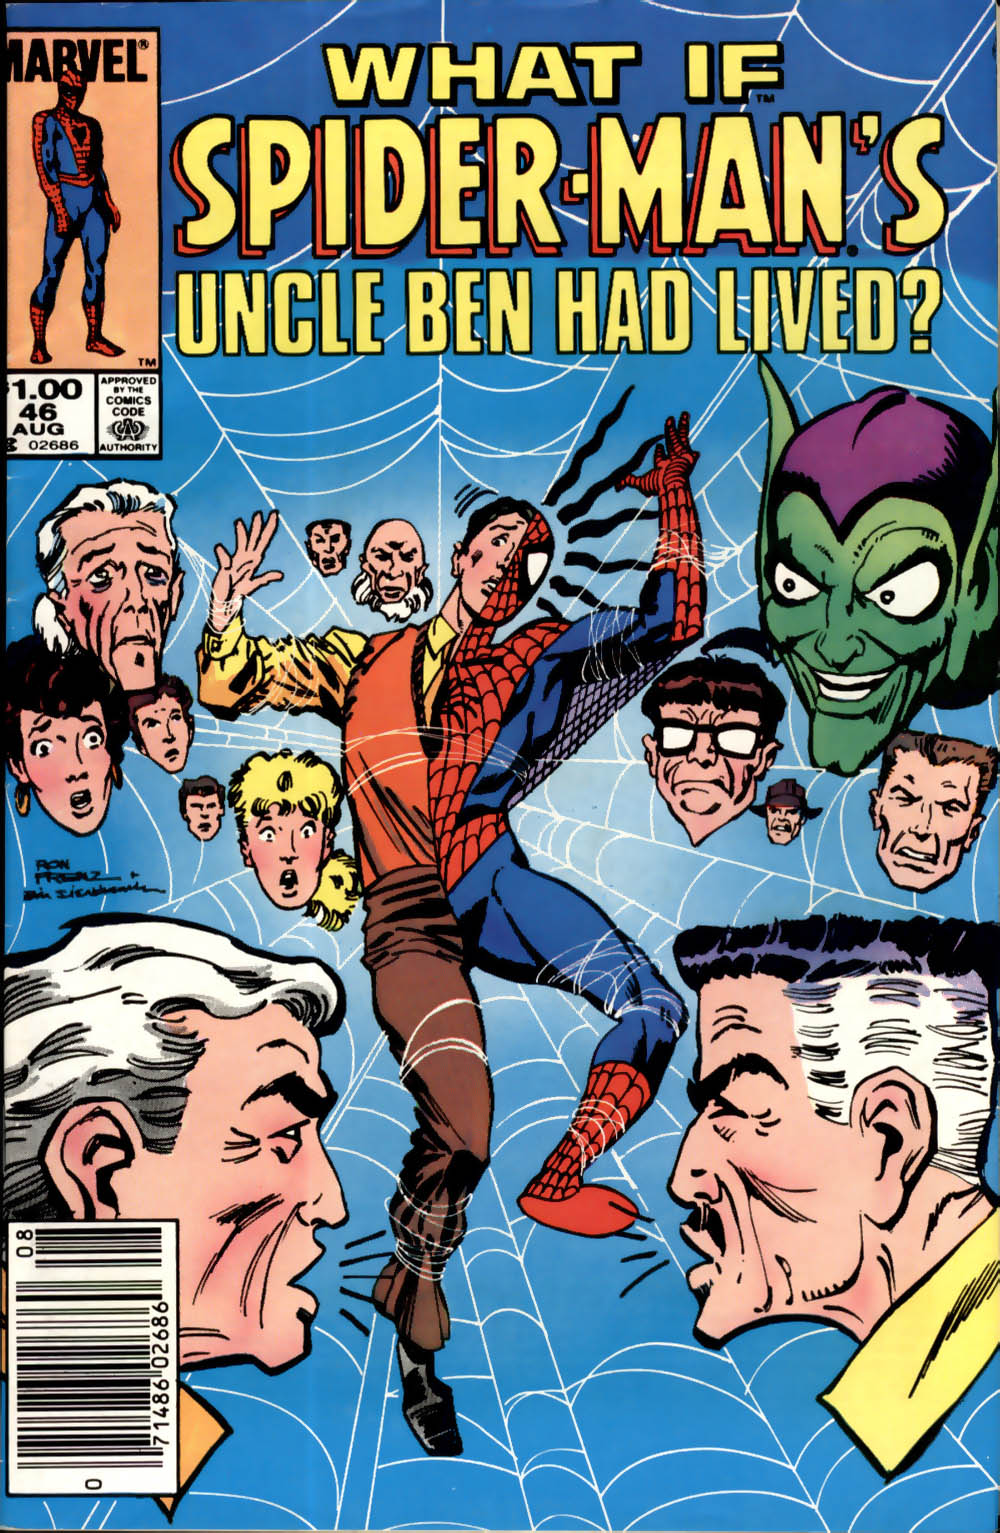 Spiderman's uncle ben had lived